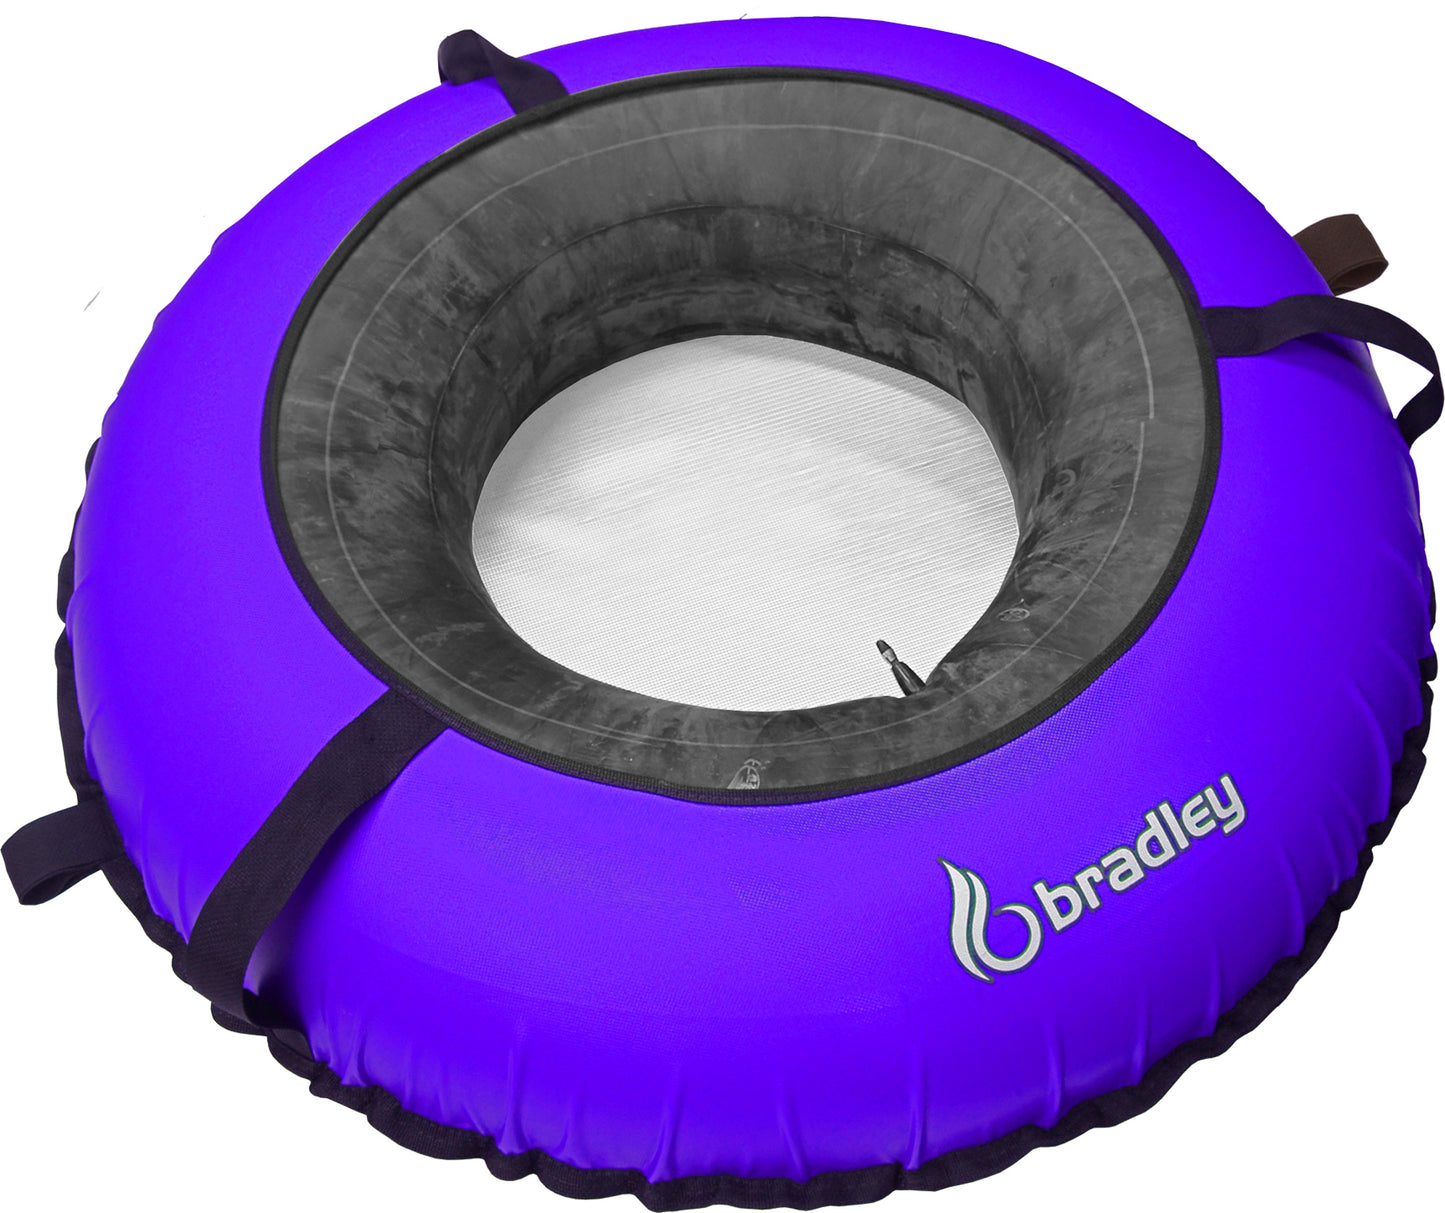 Bradley heavy duty tubes for floating the river; Whitewater water tube; Rubber inner tube with cover for river floating; Linking river tubes for floating the river; river raft tube (Choose your color)